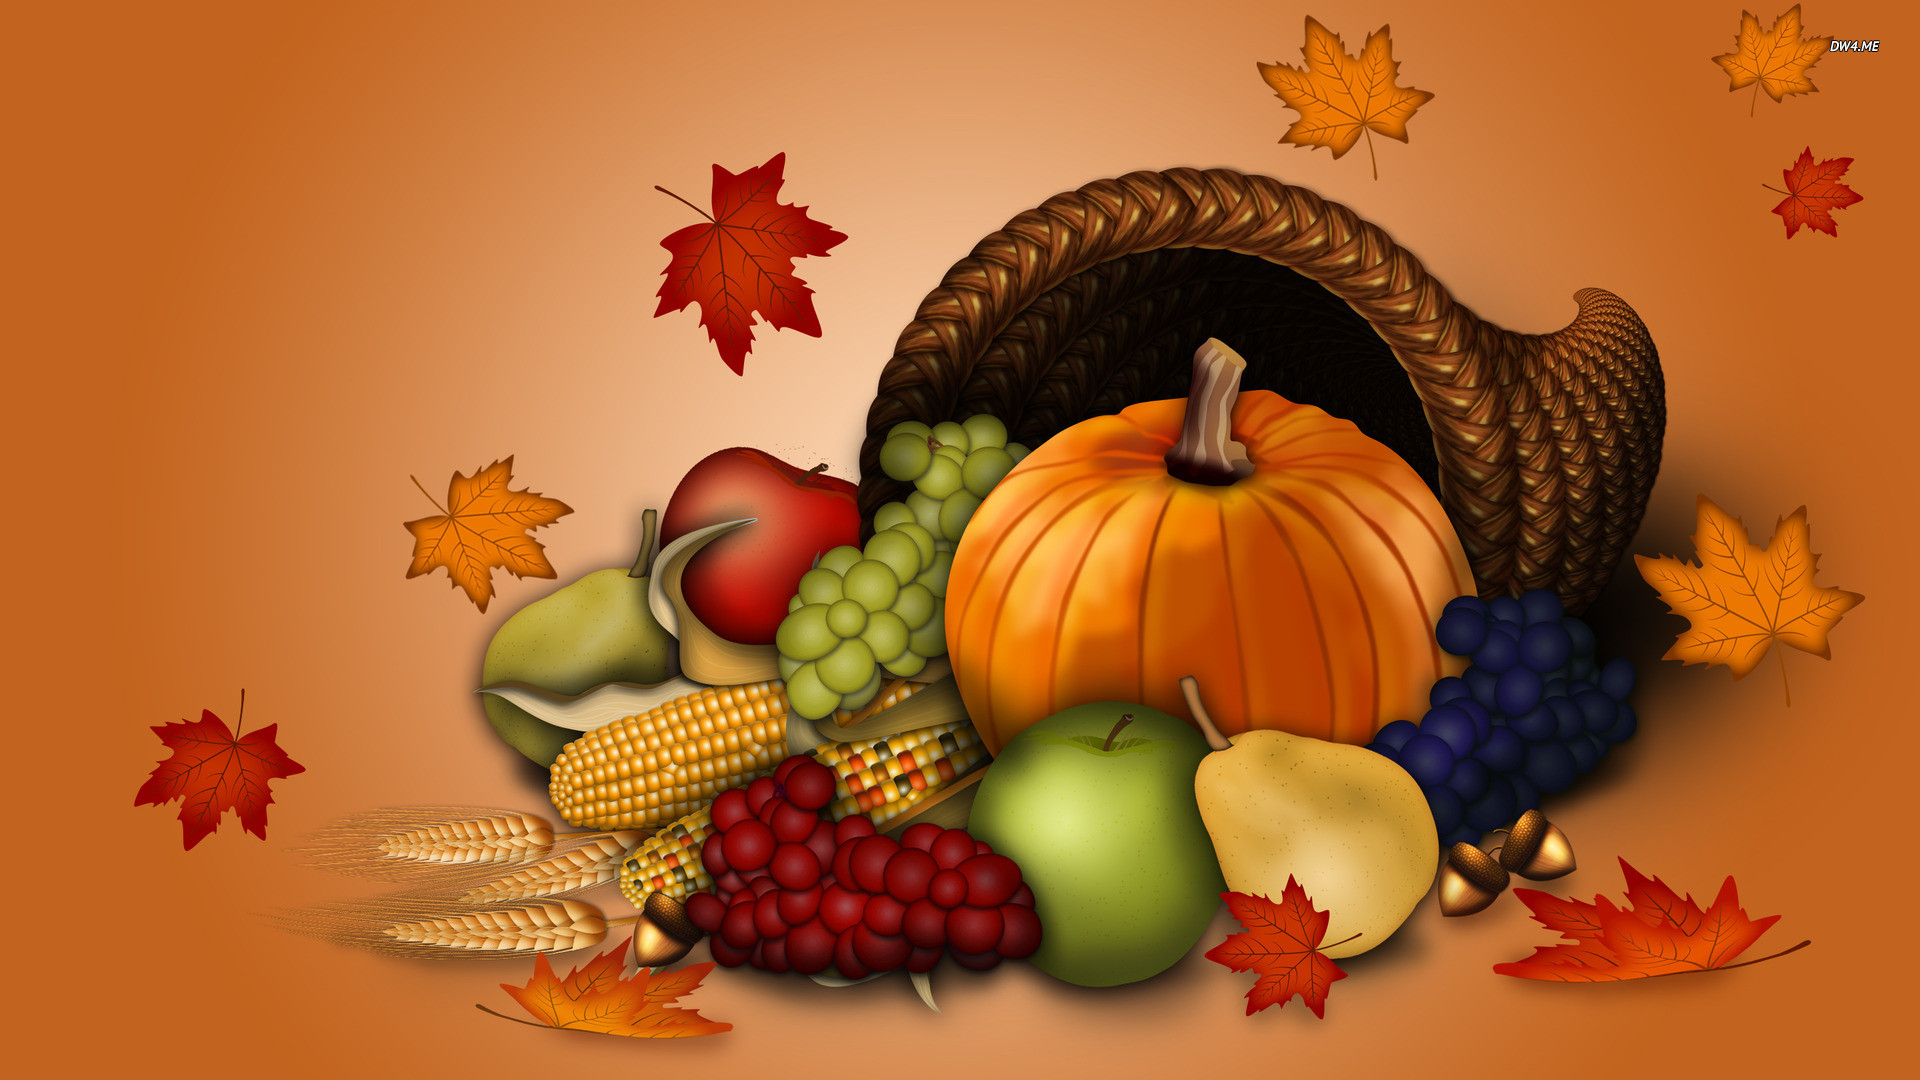 Thanksgiving Background Photos 2016 | Wallpapers, Backgrounds ...